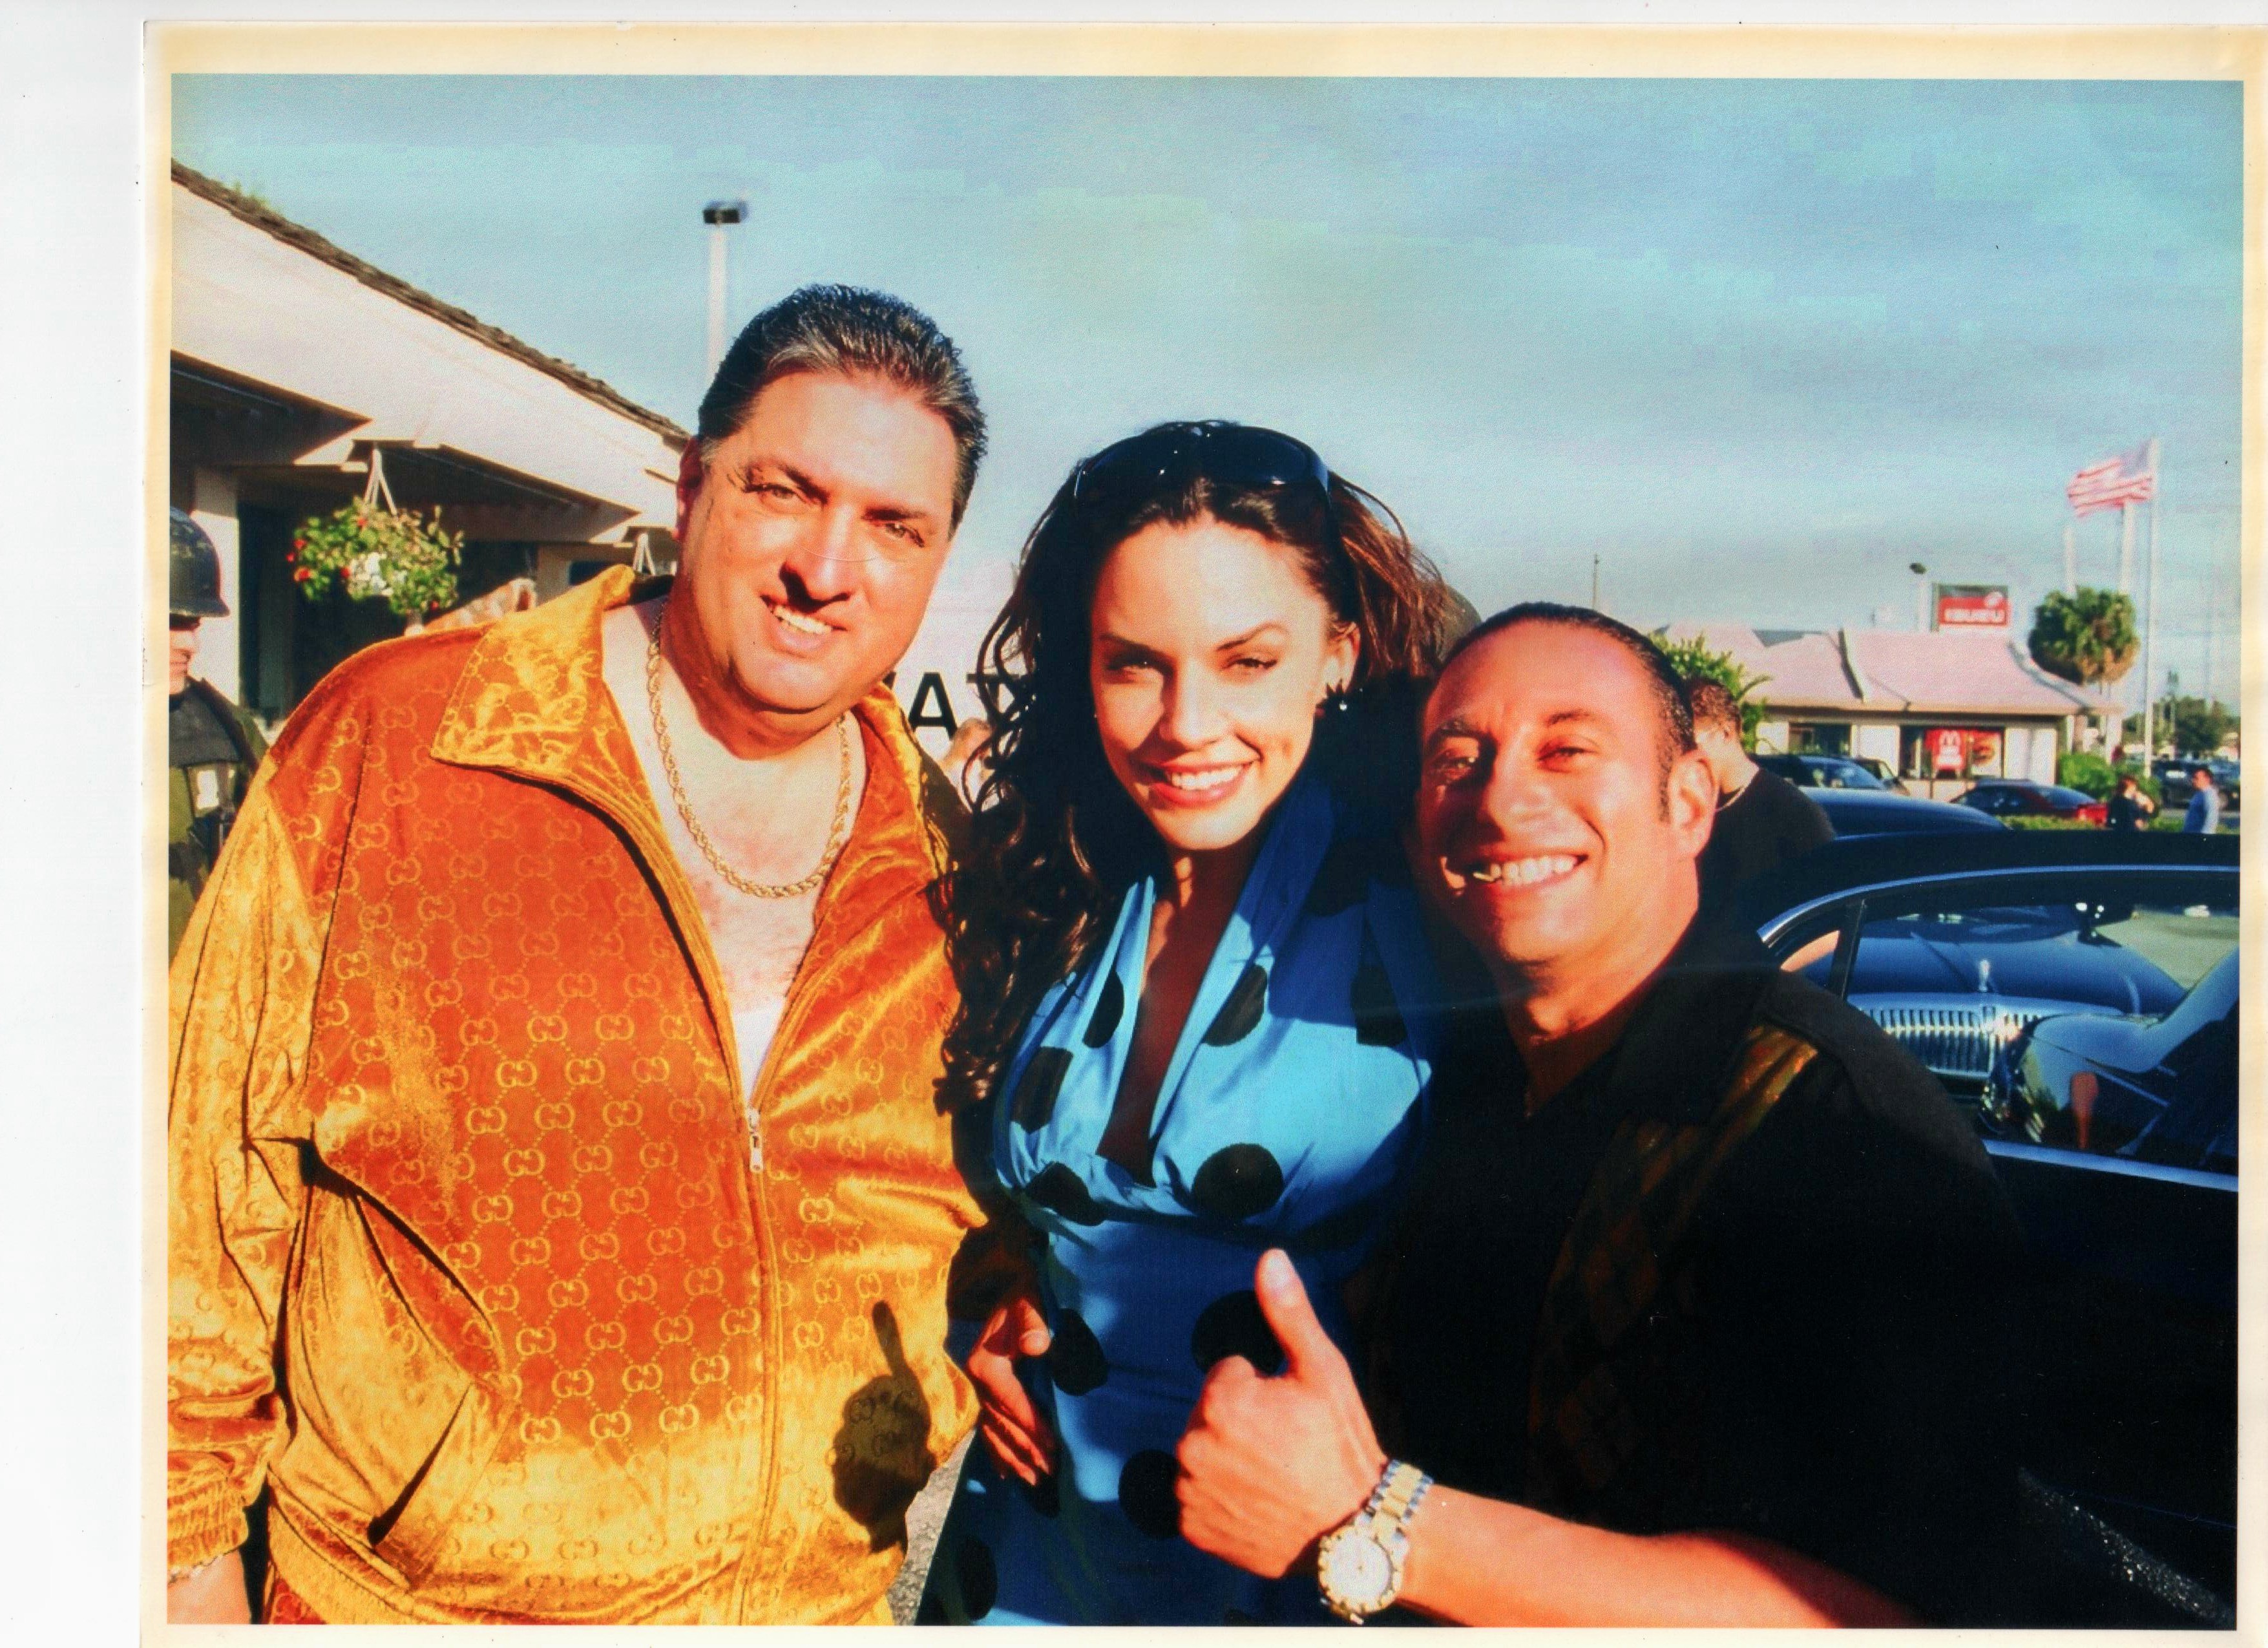 vince, krista and steven on the set of shut up and kiss me